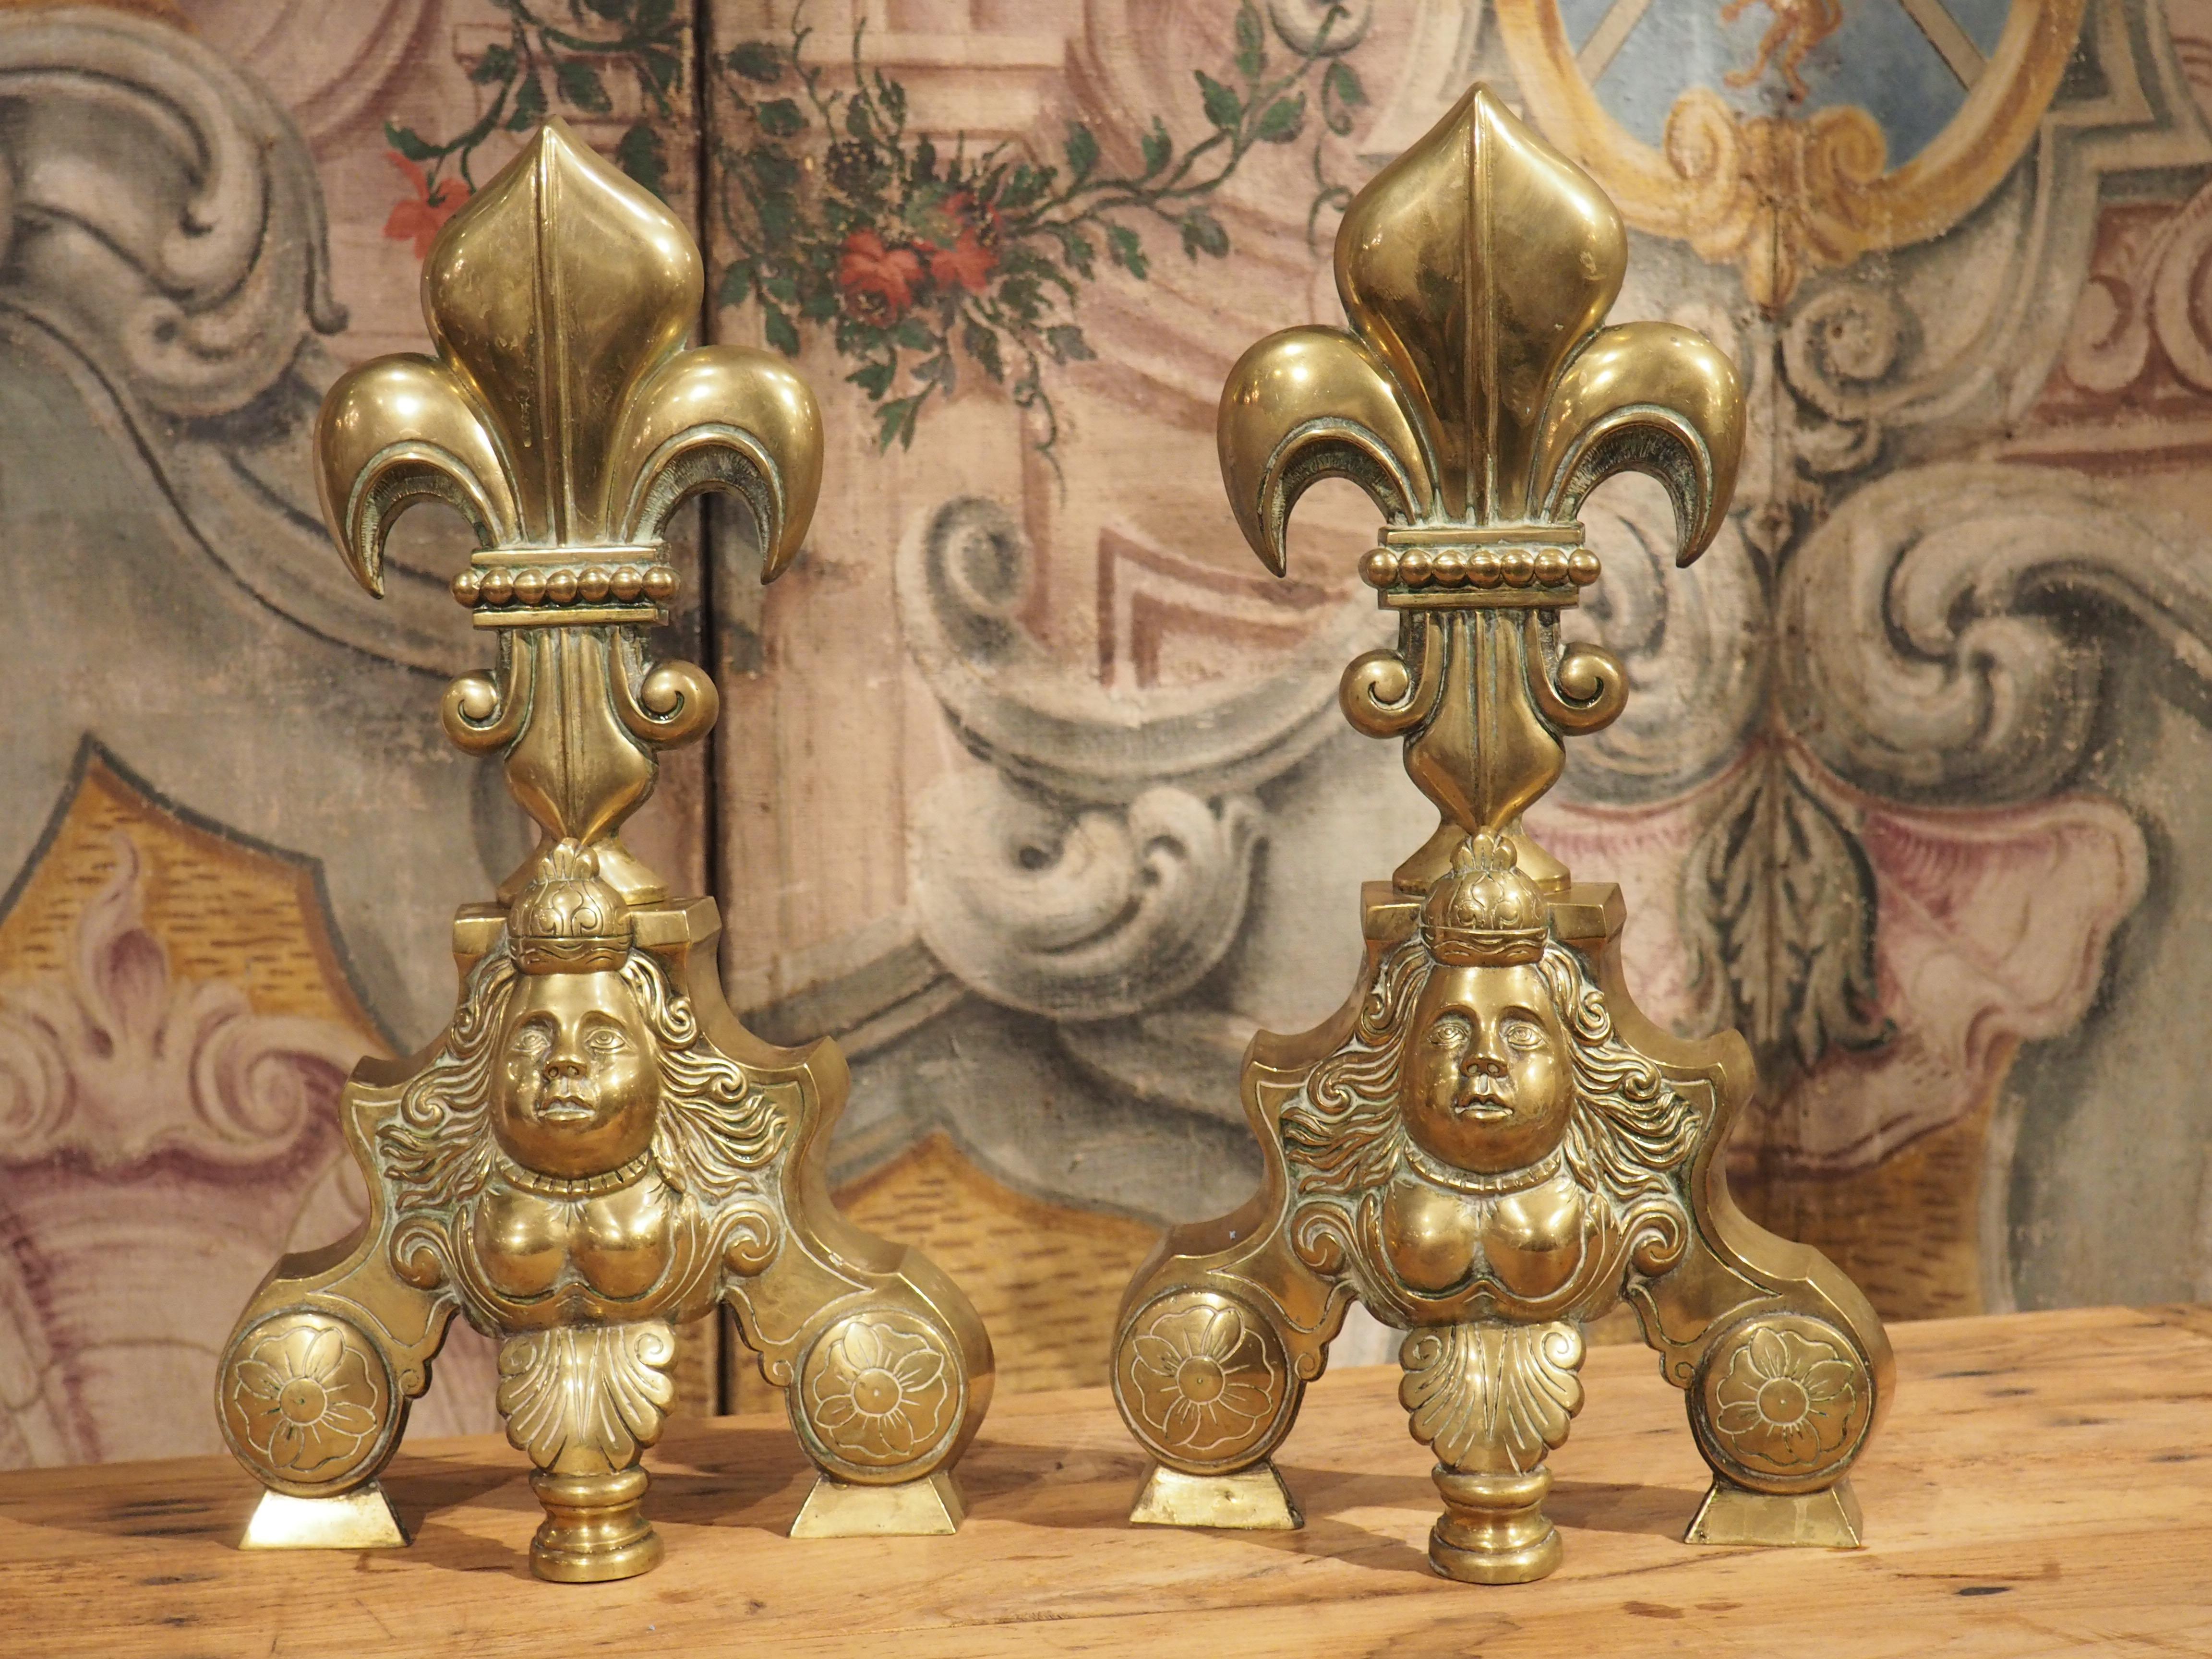 Historically associated with the French monarchy, the fleur de lys is a stylized version of a lily flower. Our pair of French brass fleur de lys chenets, which are from the 1800’s, also feature a crowned mascaron beneath each flower. At only 4 1/2